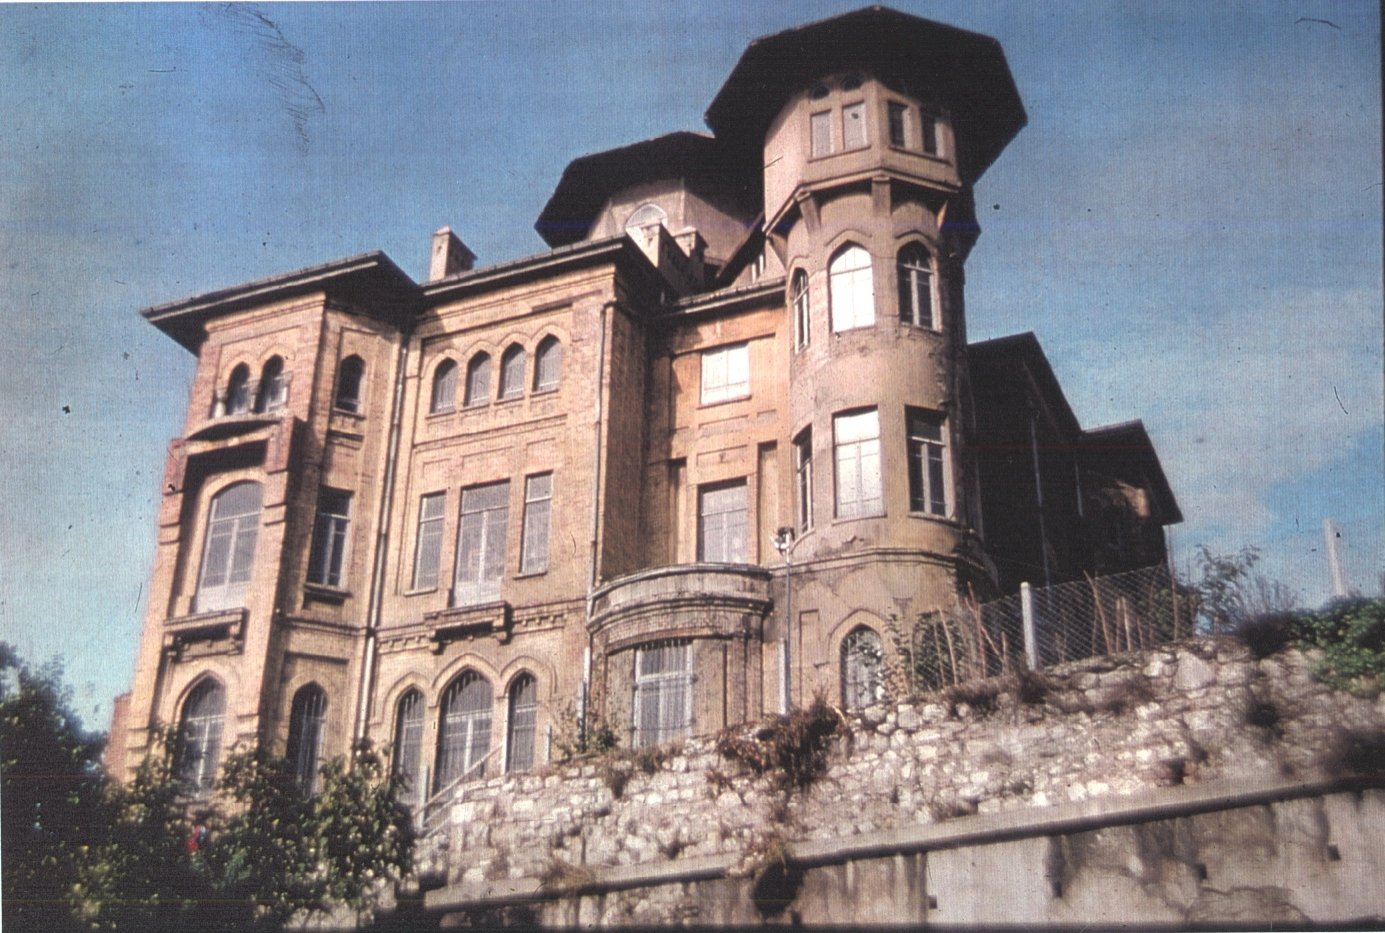 An exterior view of the Bolulu Habib Bey Mansion, Istanbul, Turkey, in the 1990s. (Courtesy of SALT Research)